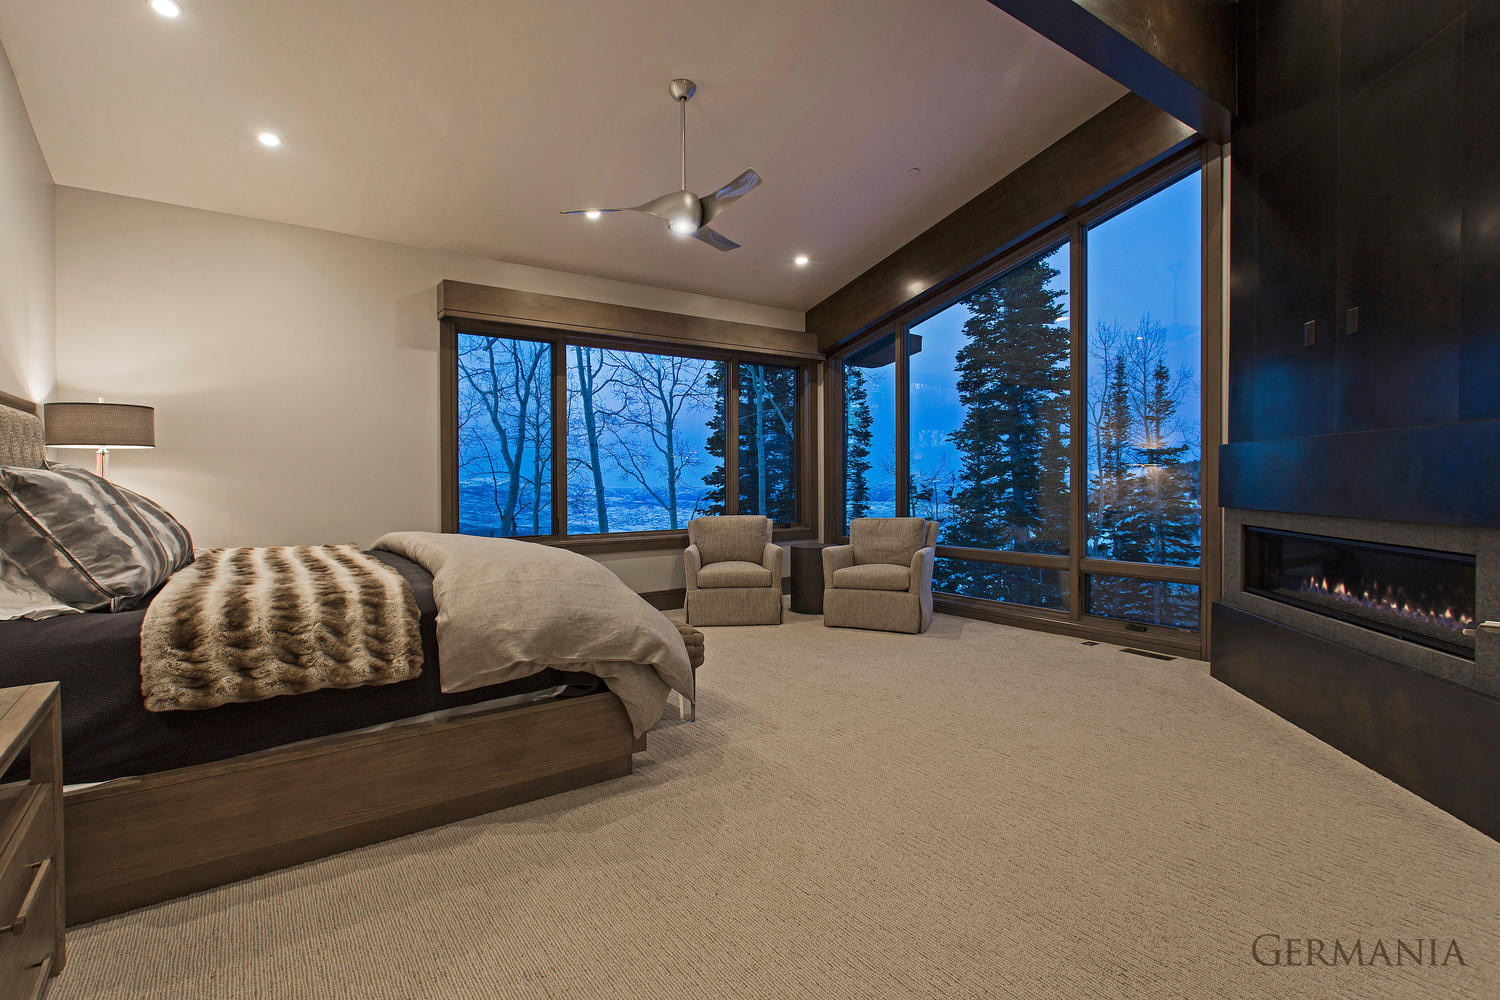 We make custom home master bedroom design a welcoming and exciting experience. This is your luxury home. Germania Construction wants you to live a luxurious experience.